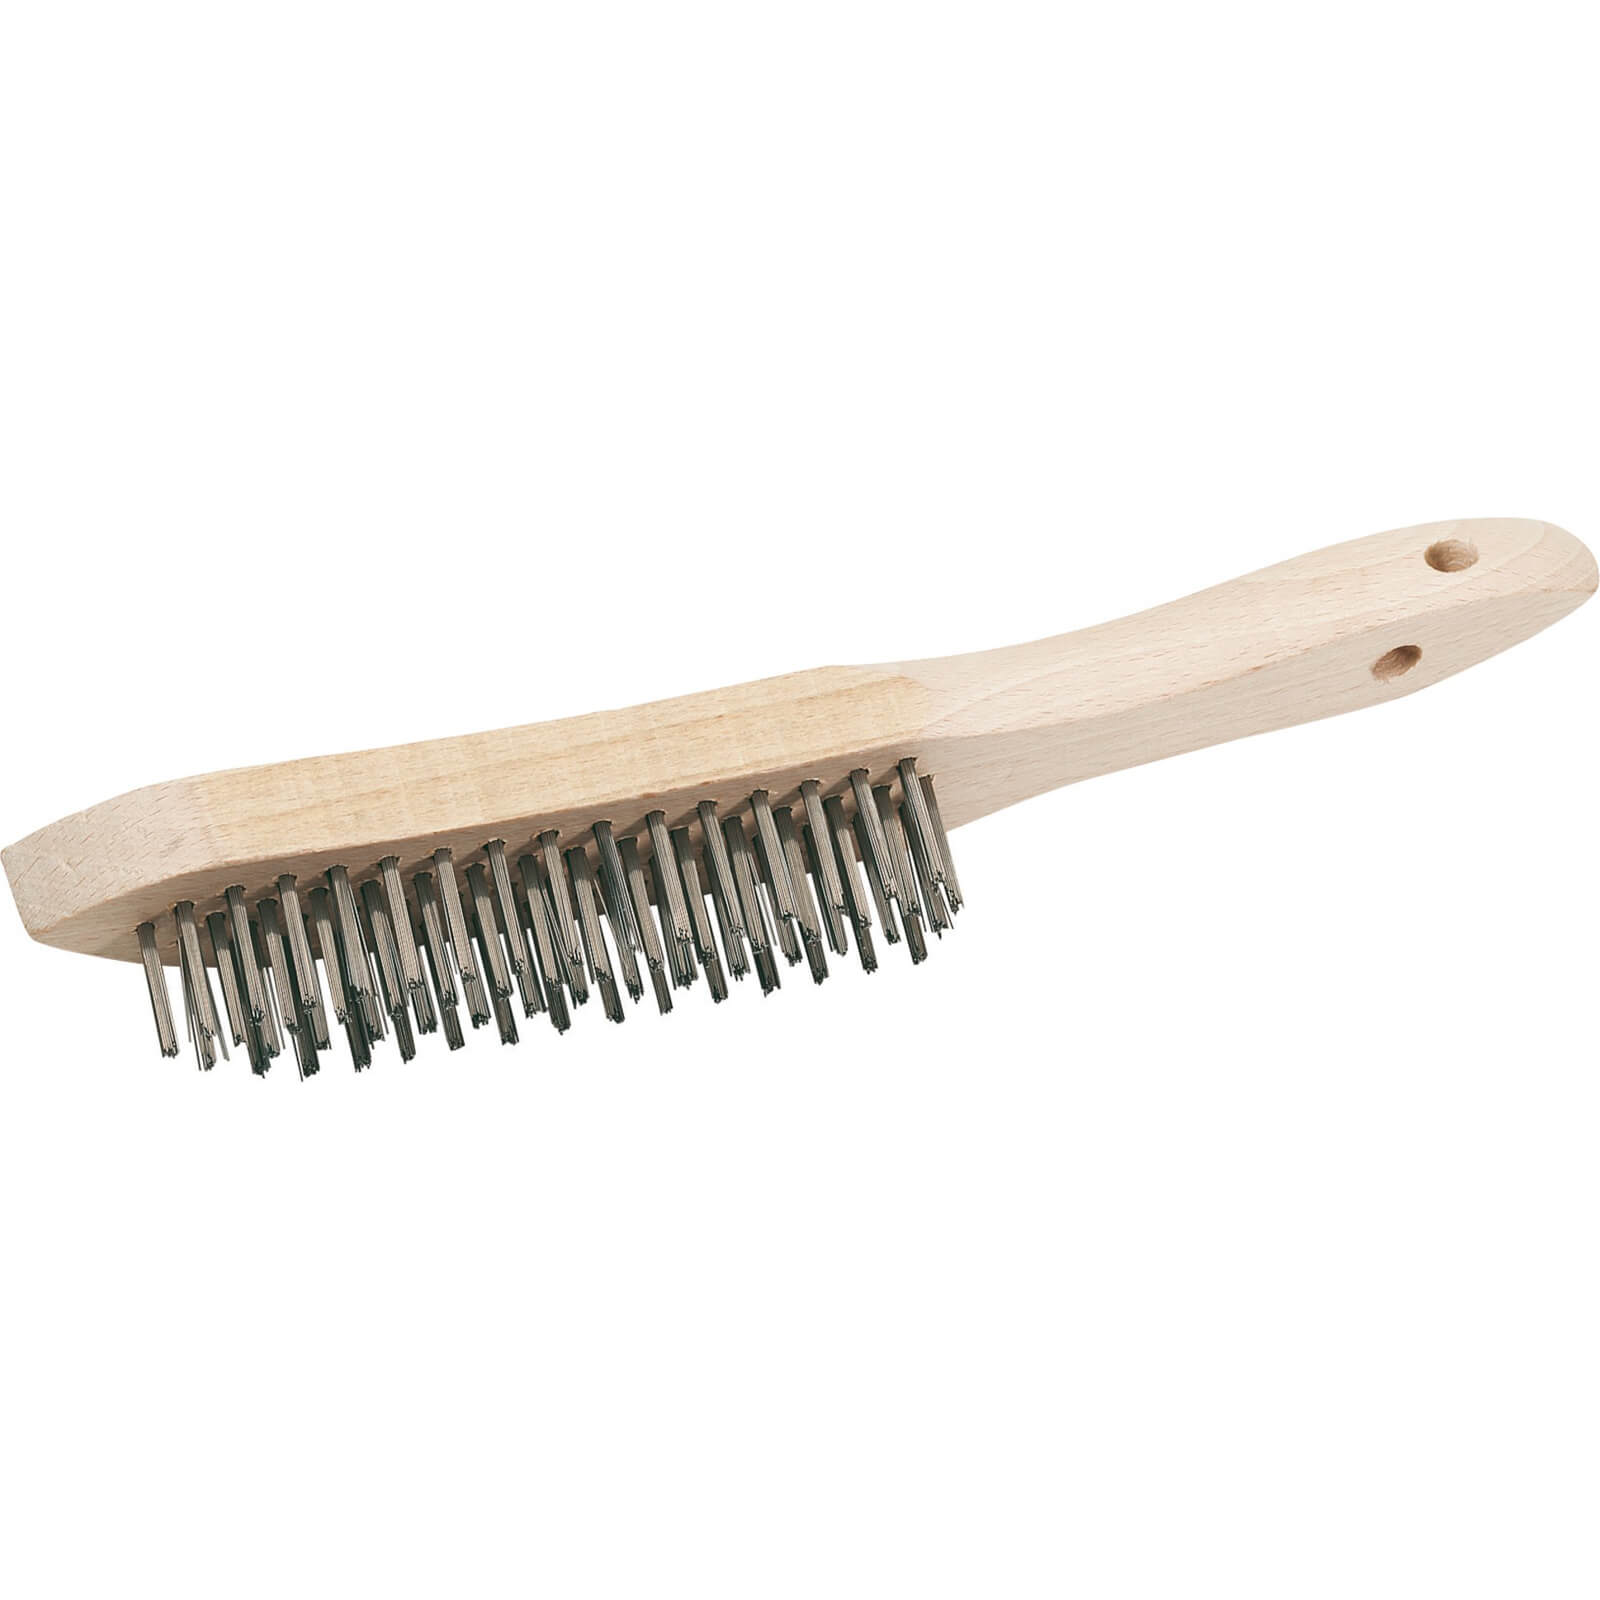 Photo of Draper Stainless Steel Scratch Wire Brush 4 Rows